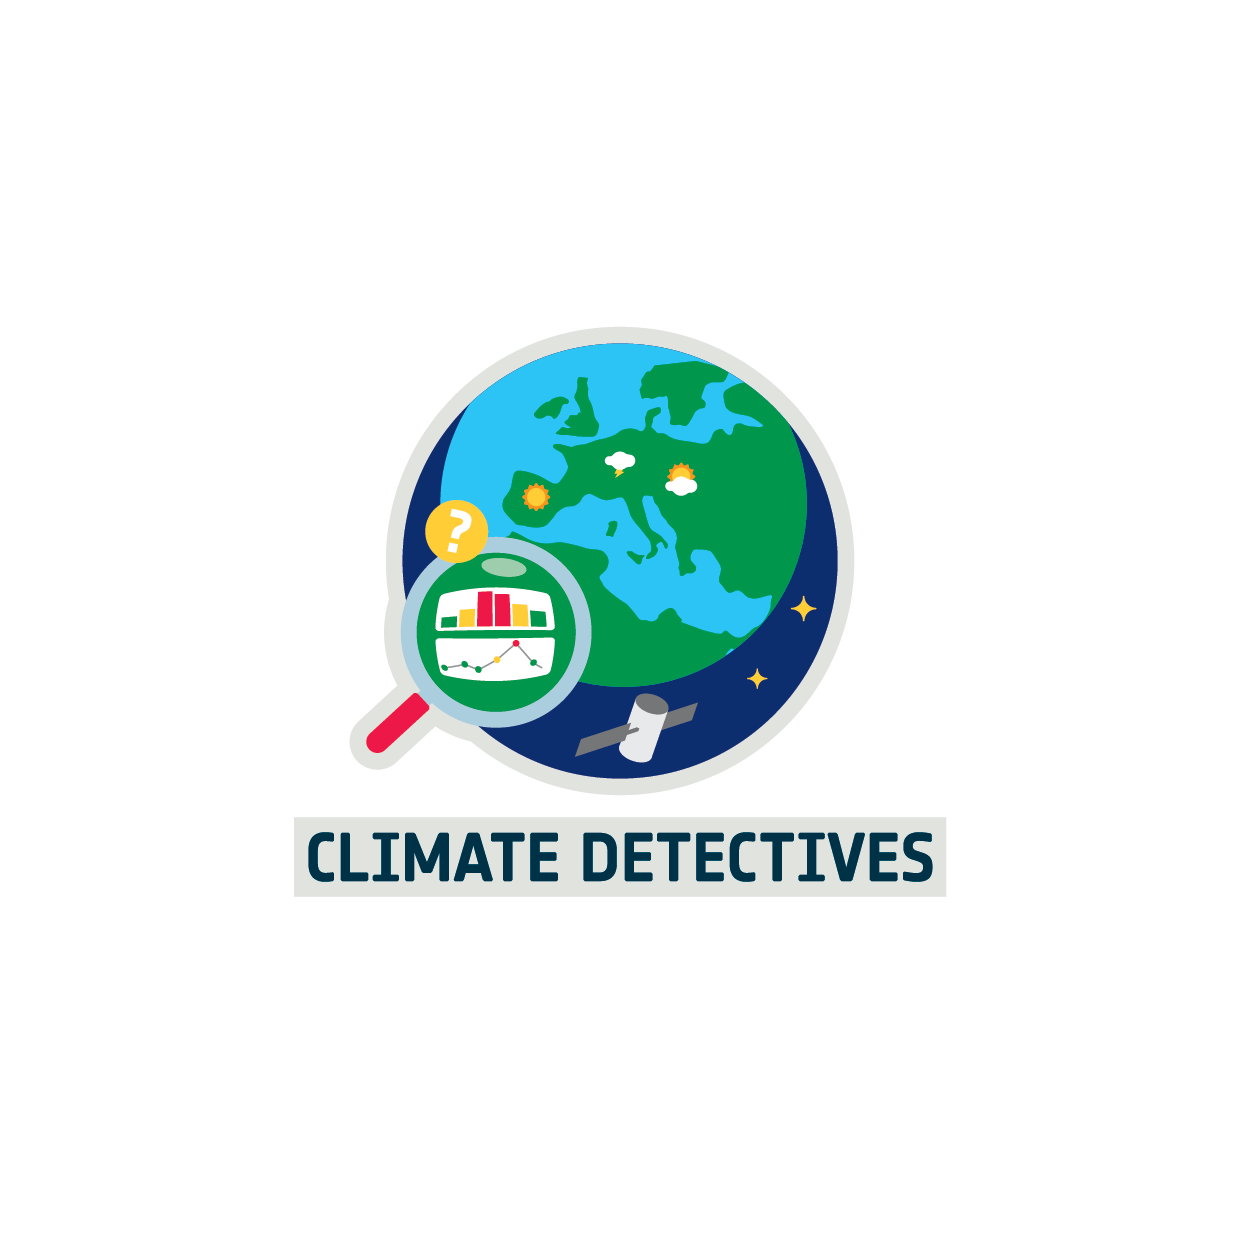 Climate Detectives from Cantacuzini